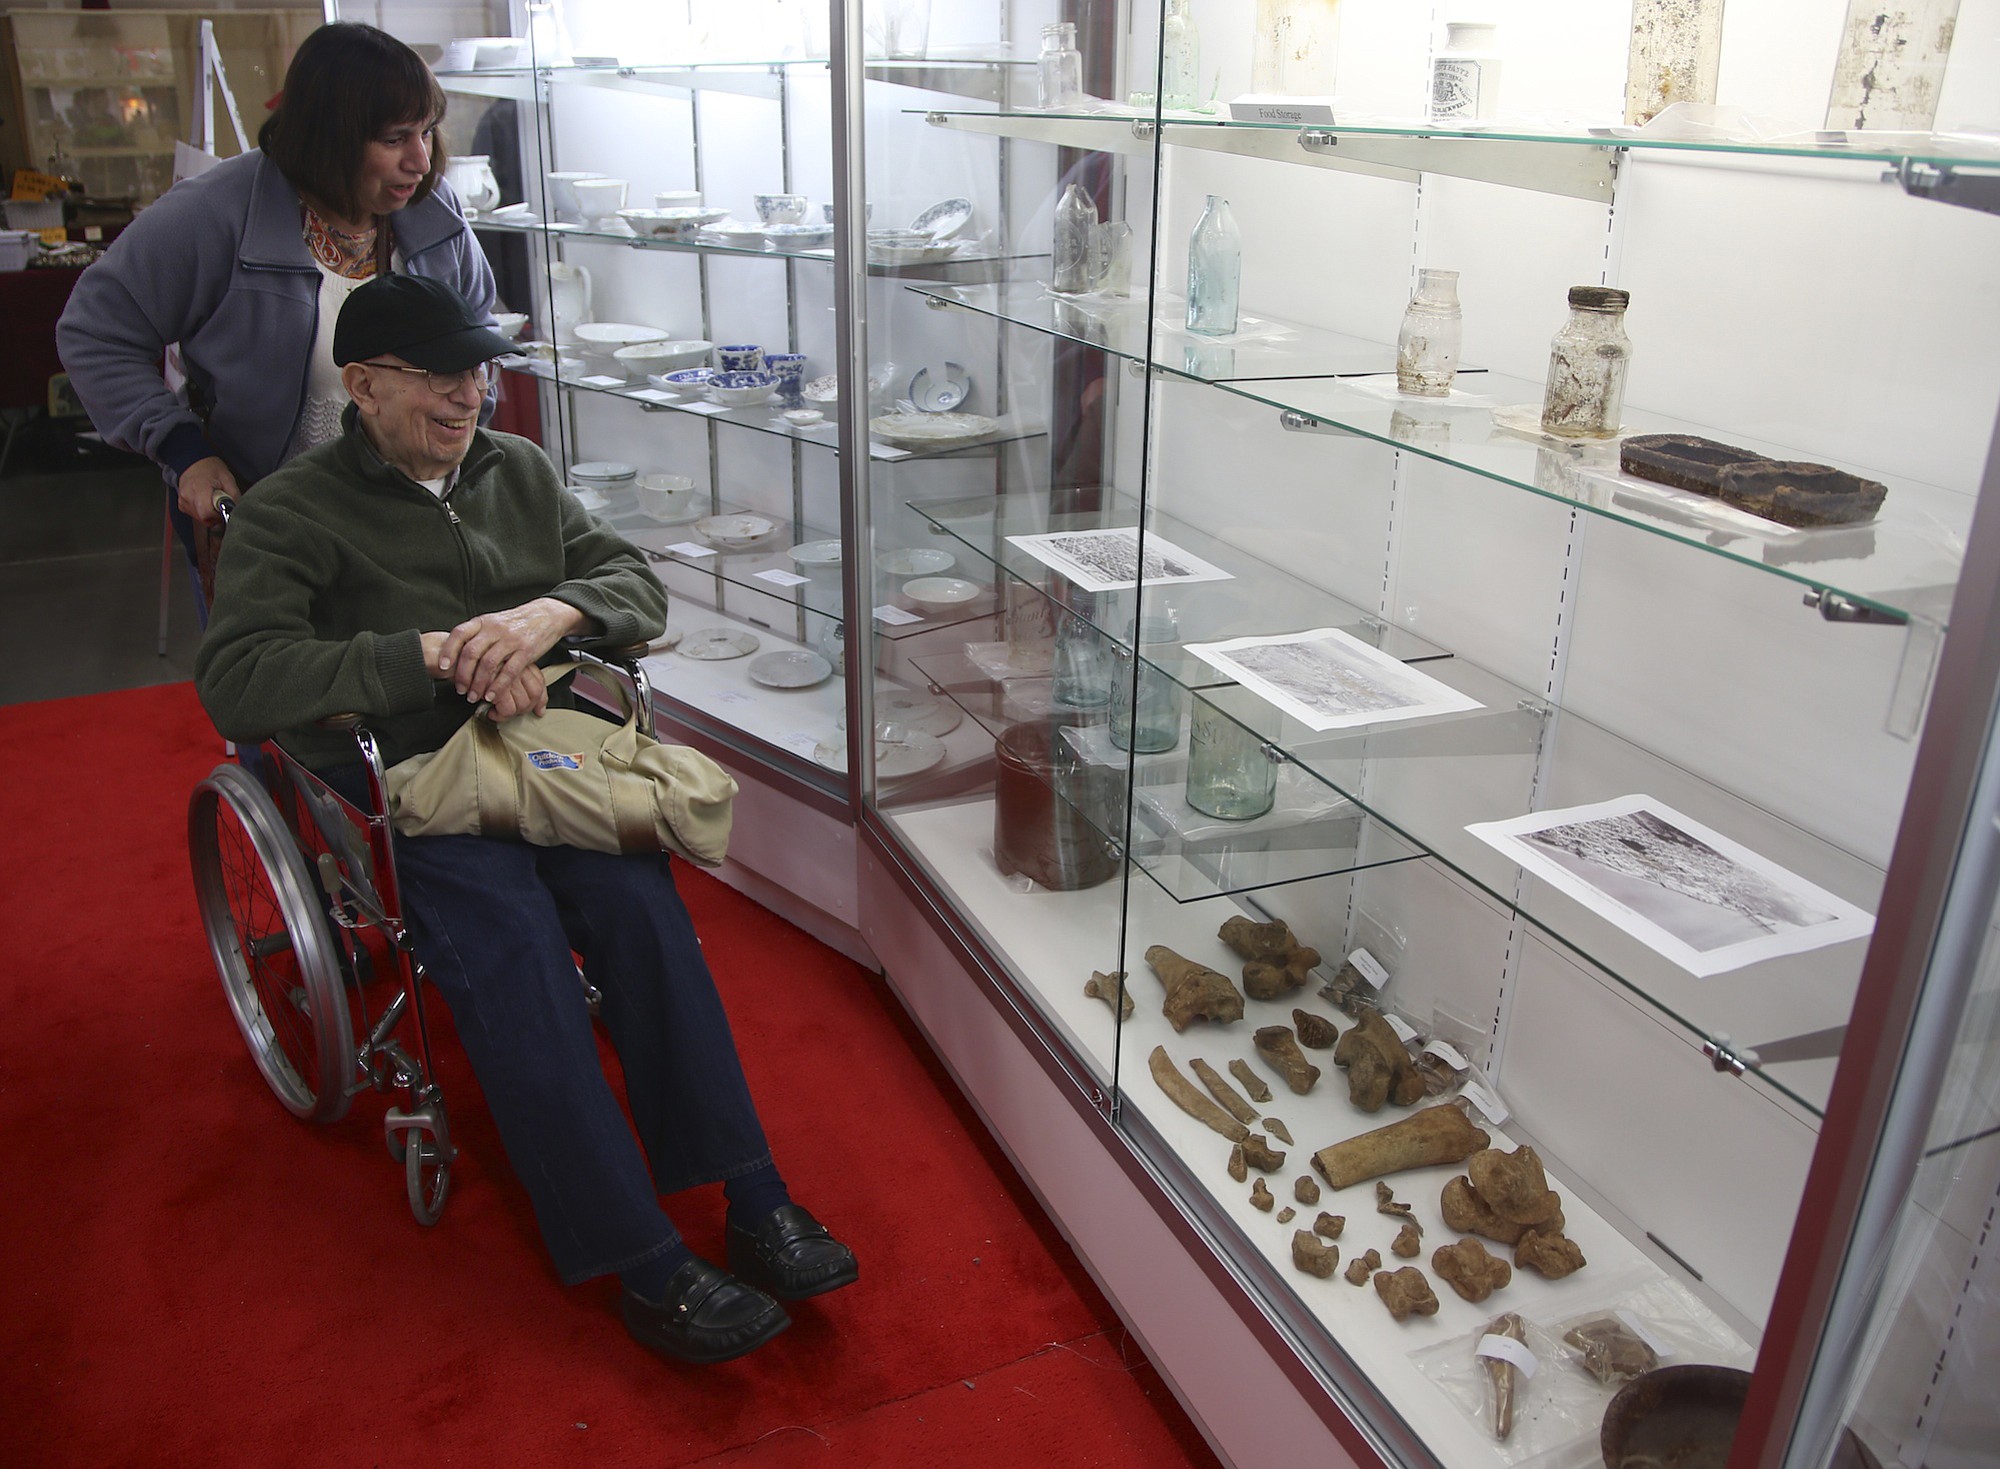 Susan Mulqueen and her father Ralph Marquez look Sunday at artifacts dug up by archaeologists in downtown Vancouver.